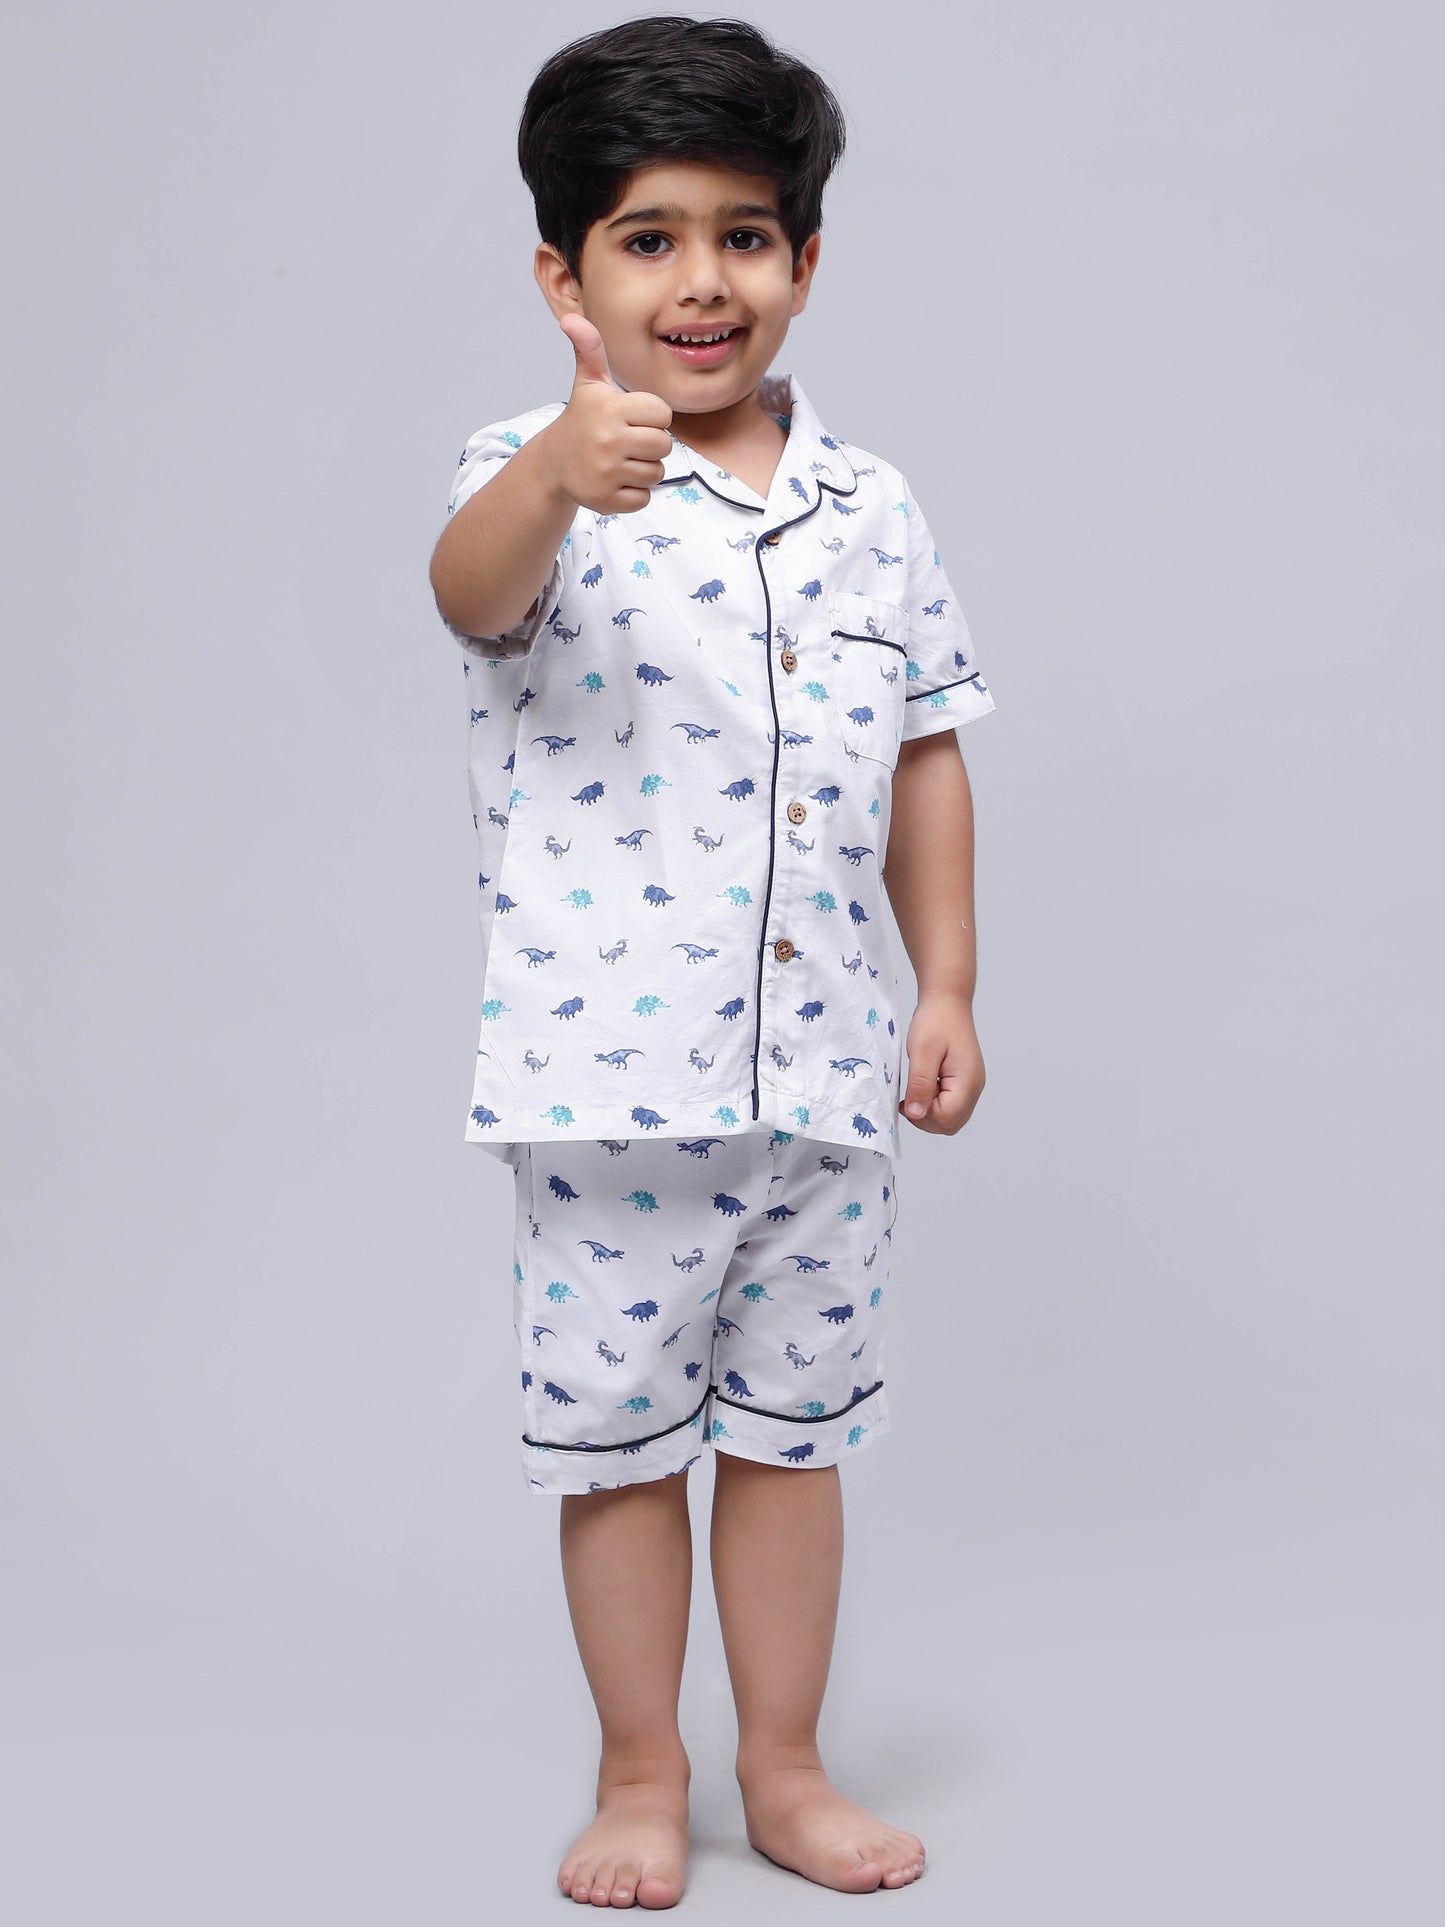 Unisex Collared Sleepsuit in Dino Print for Girls or Boys